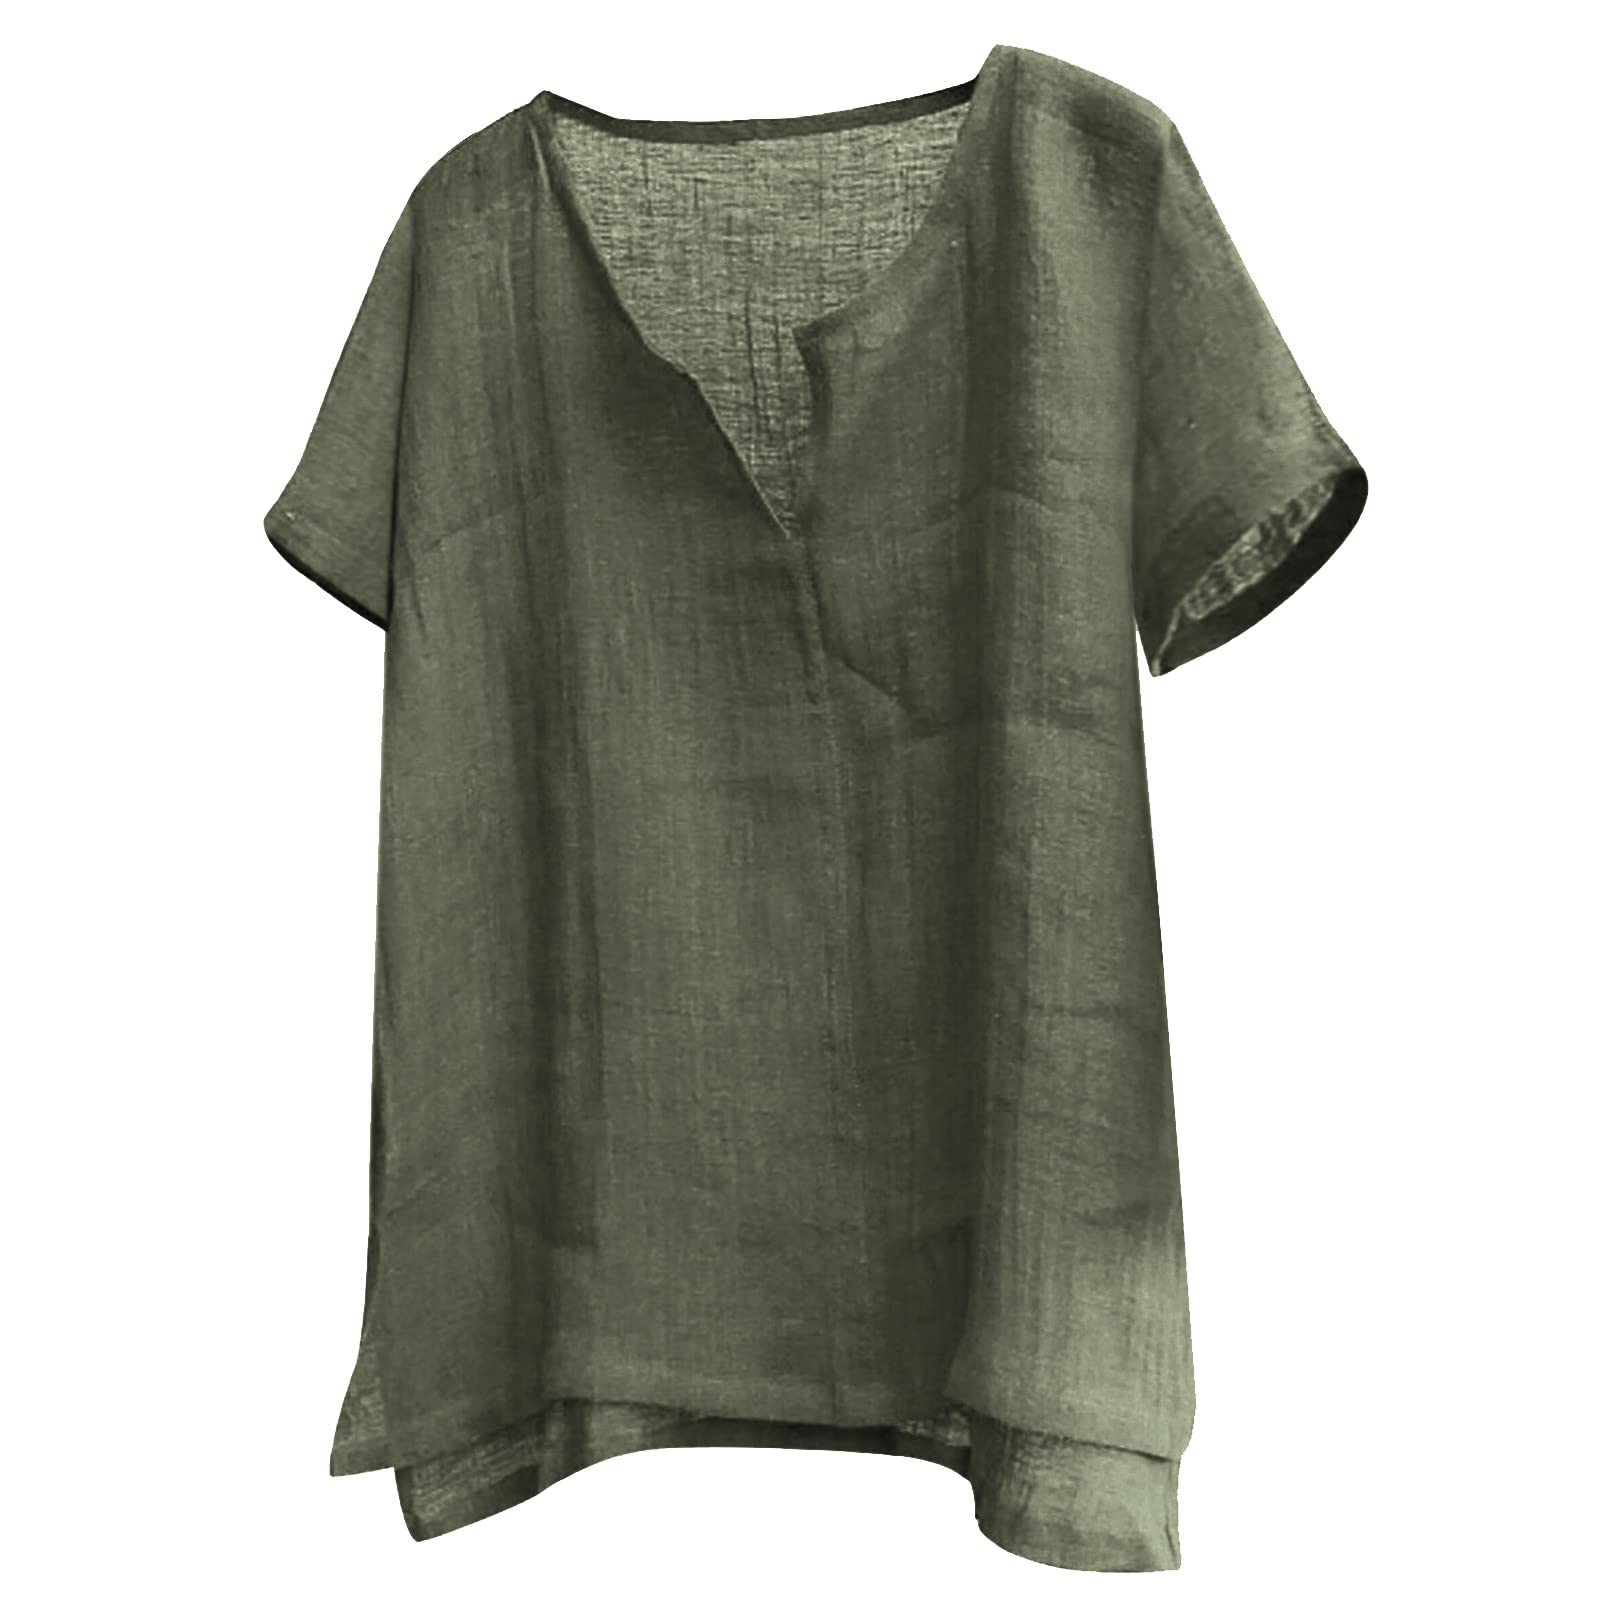 JWZUY Women's Long Sleeve V-Neck Shirts Tunic Tops Casual T-Shirt Basic  Blouse Solid Color Loose Pullover Tee Shirt Tees for Legging Army Green XL  